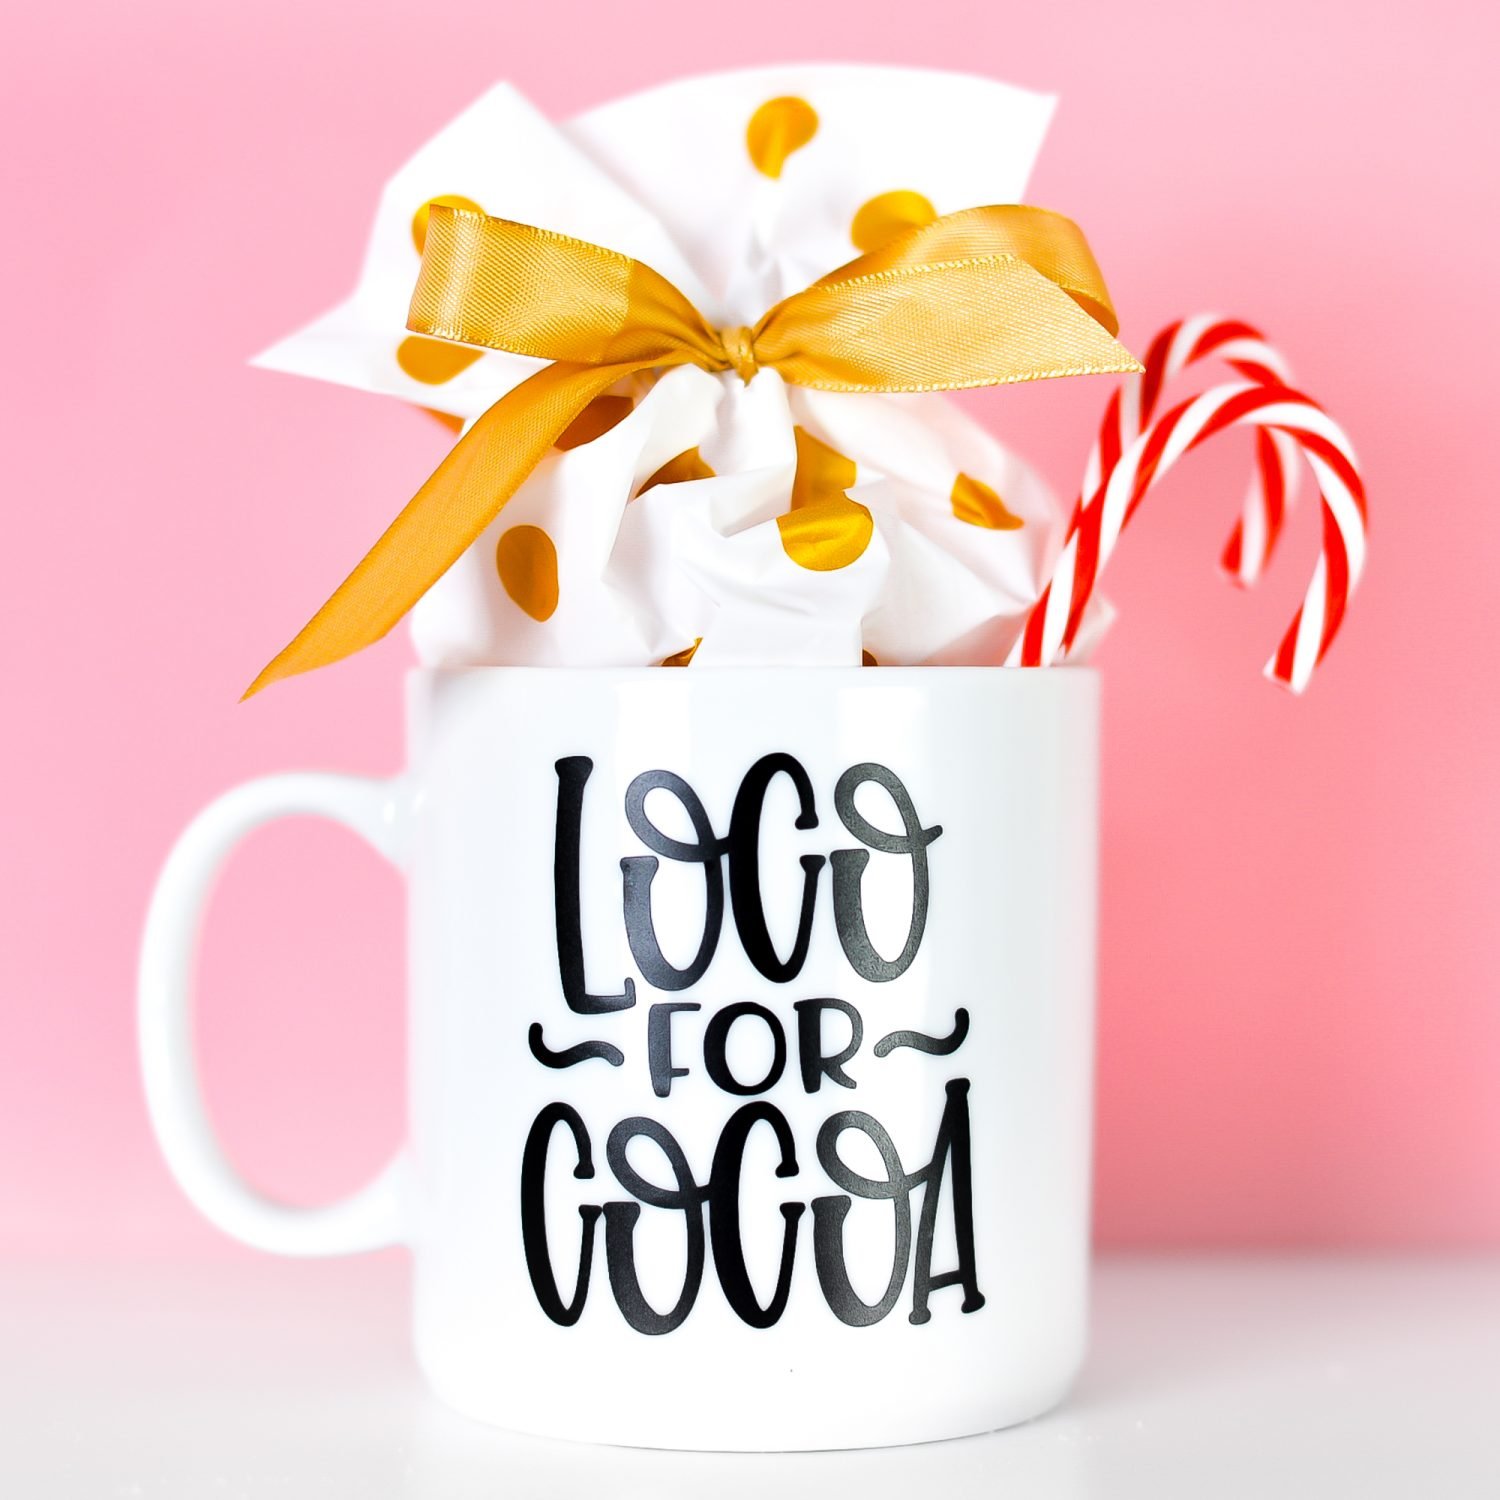 Finished loco for cocoa mug, staged with candy canes